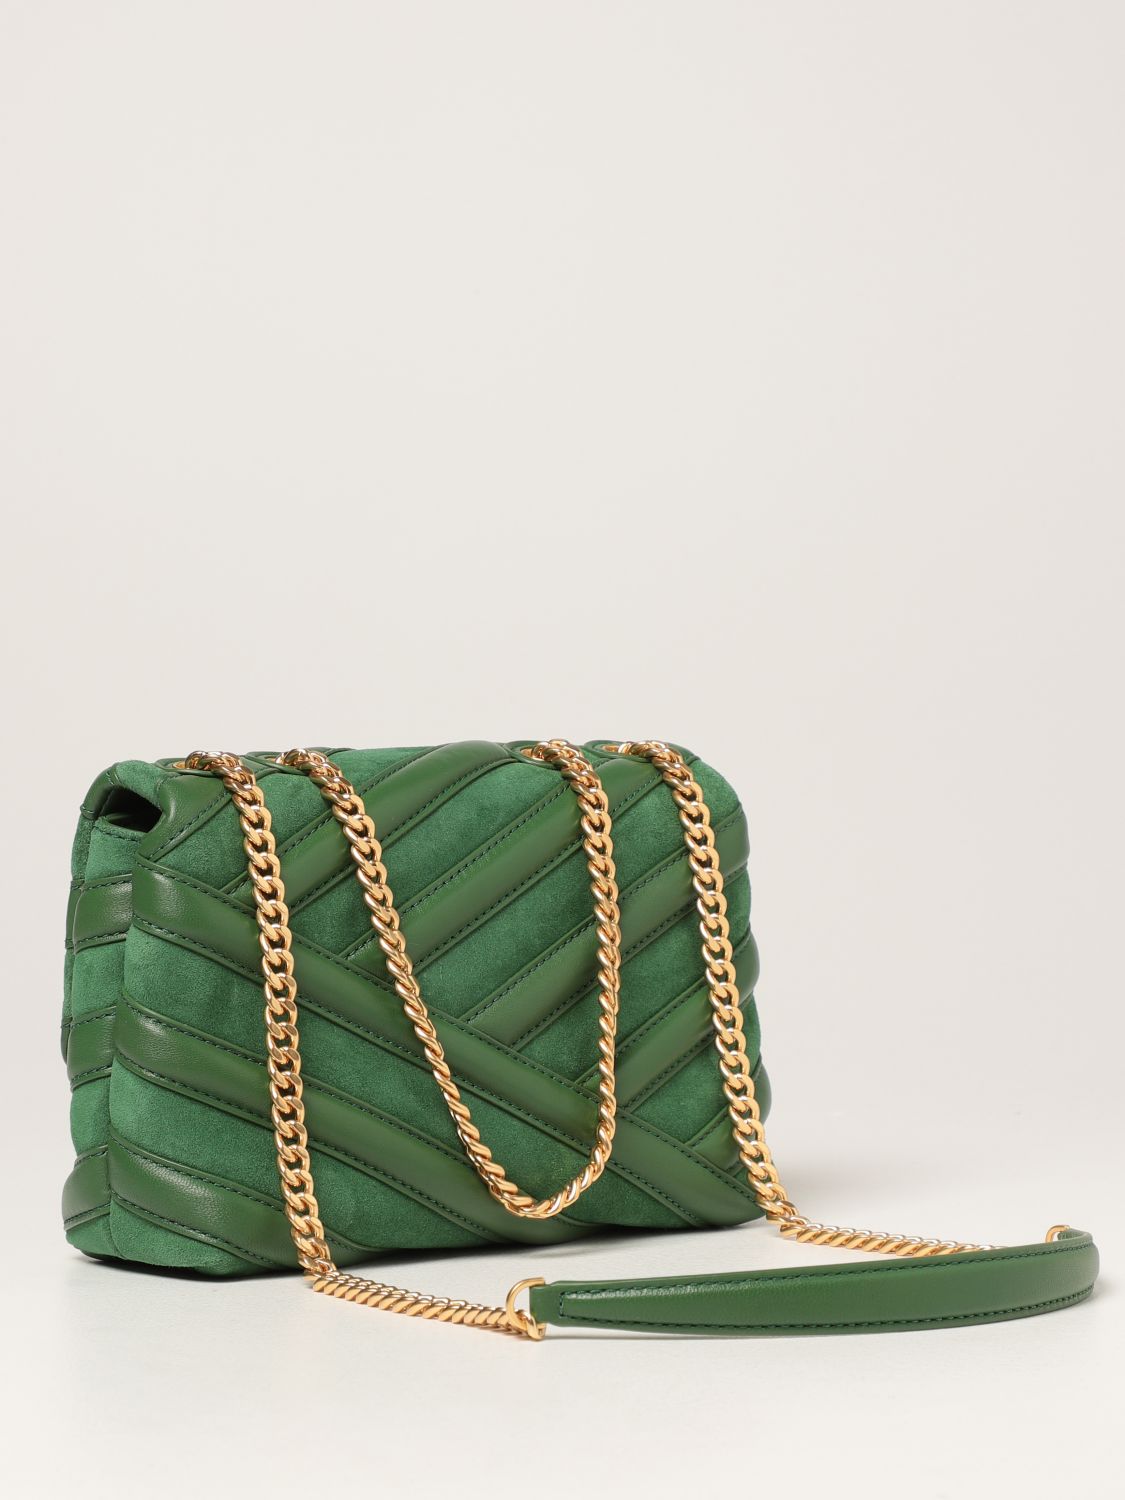 TORY BURCH: Kira bag in suede and leather - Green | Tory Burch ...